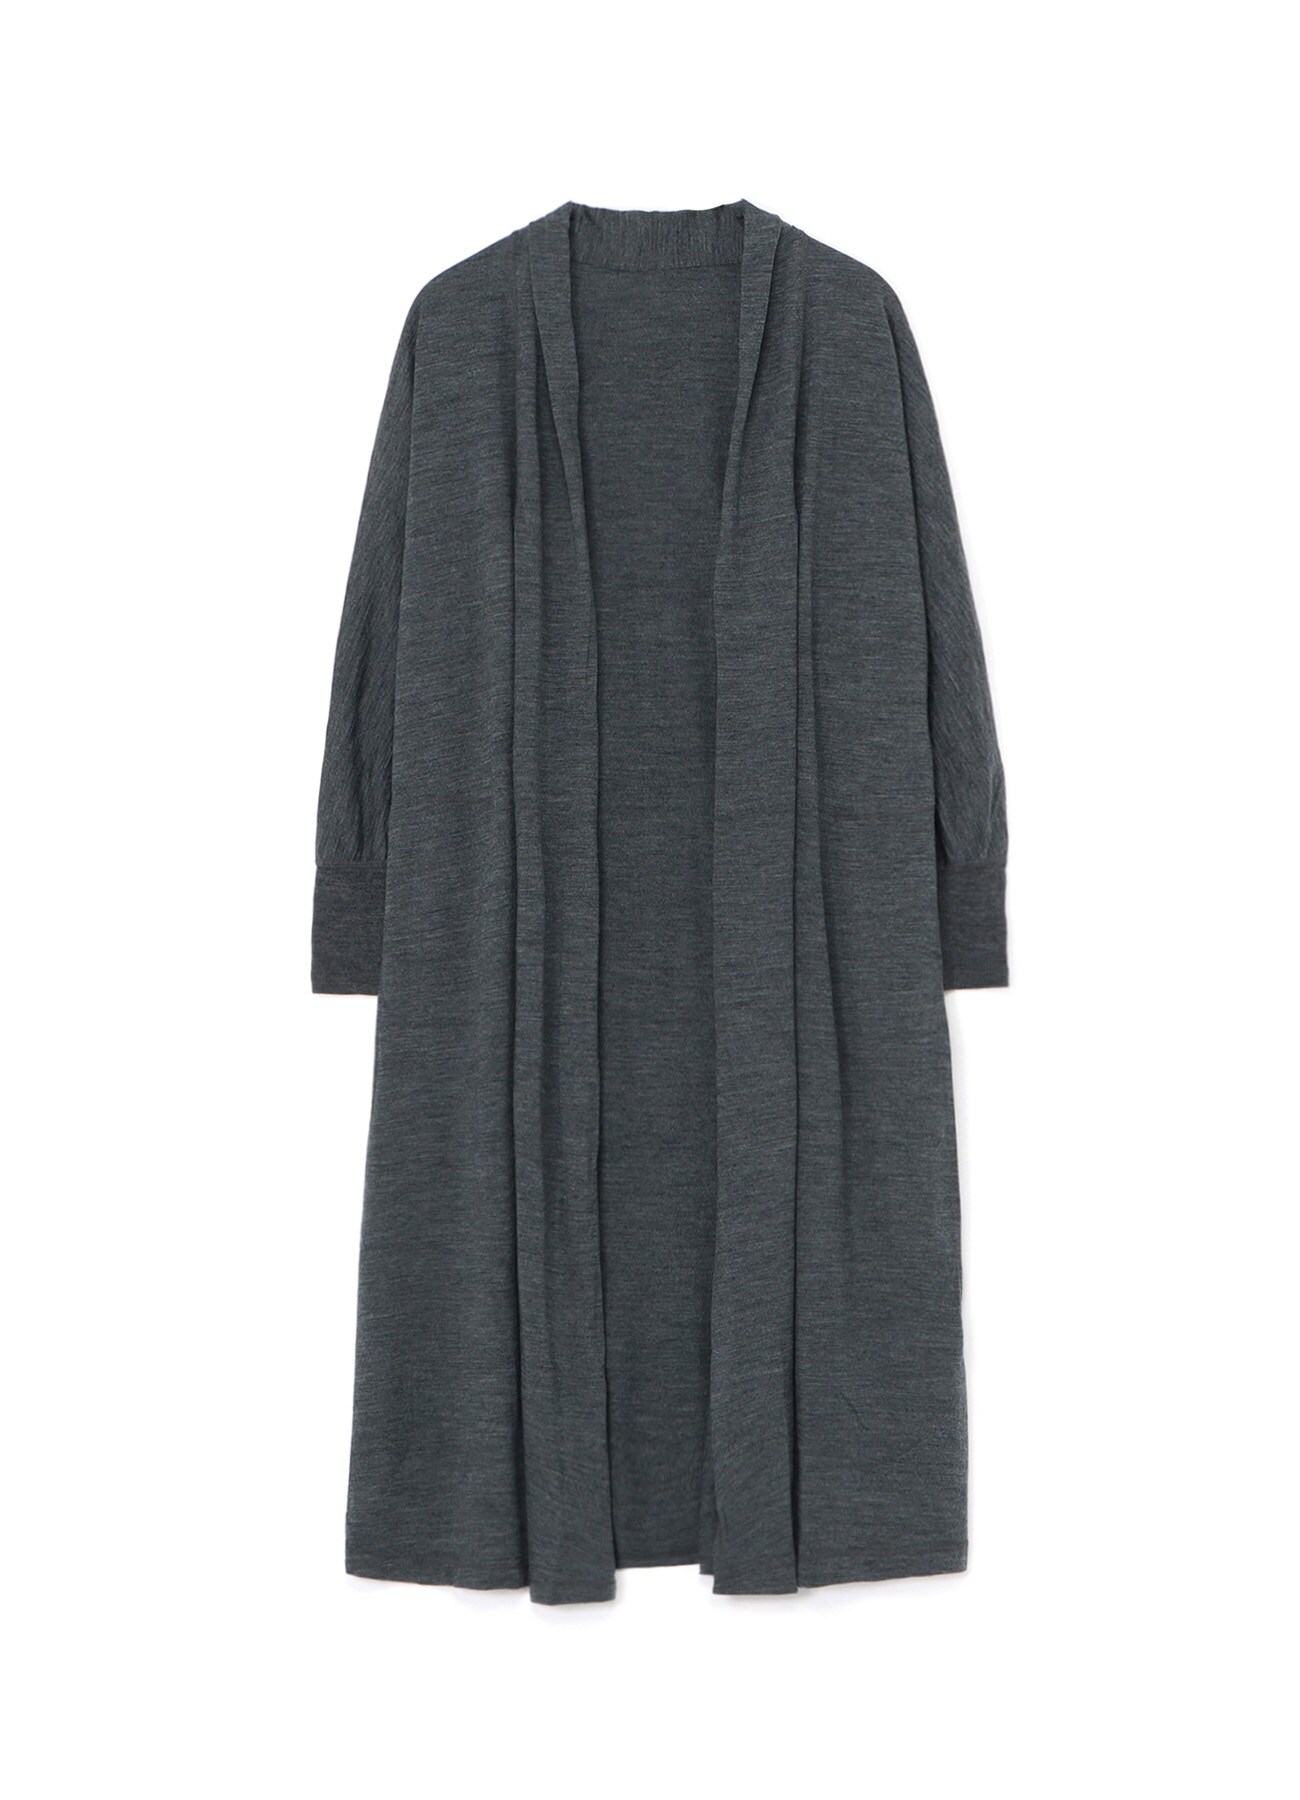 WASHABLE WOOL JERSEY DOLMAN SLEEVE LONG GOWN